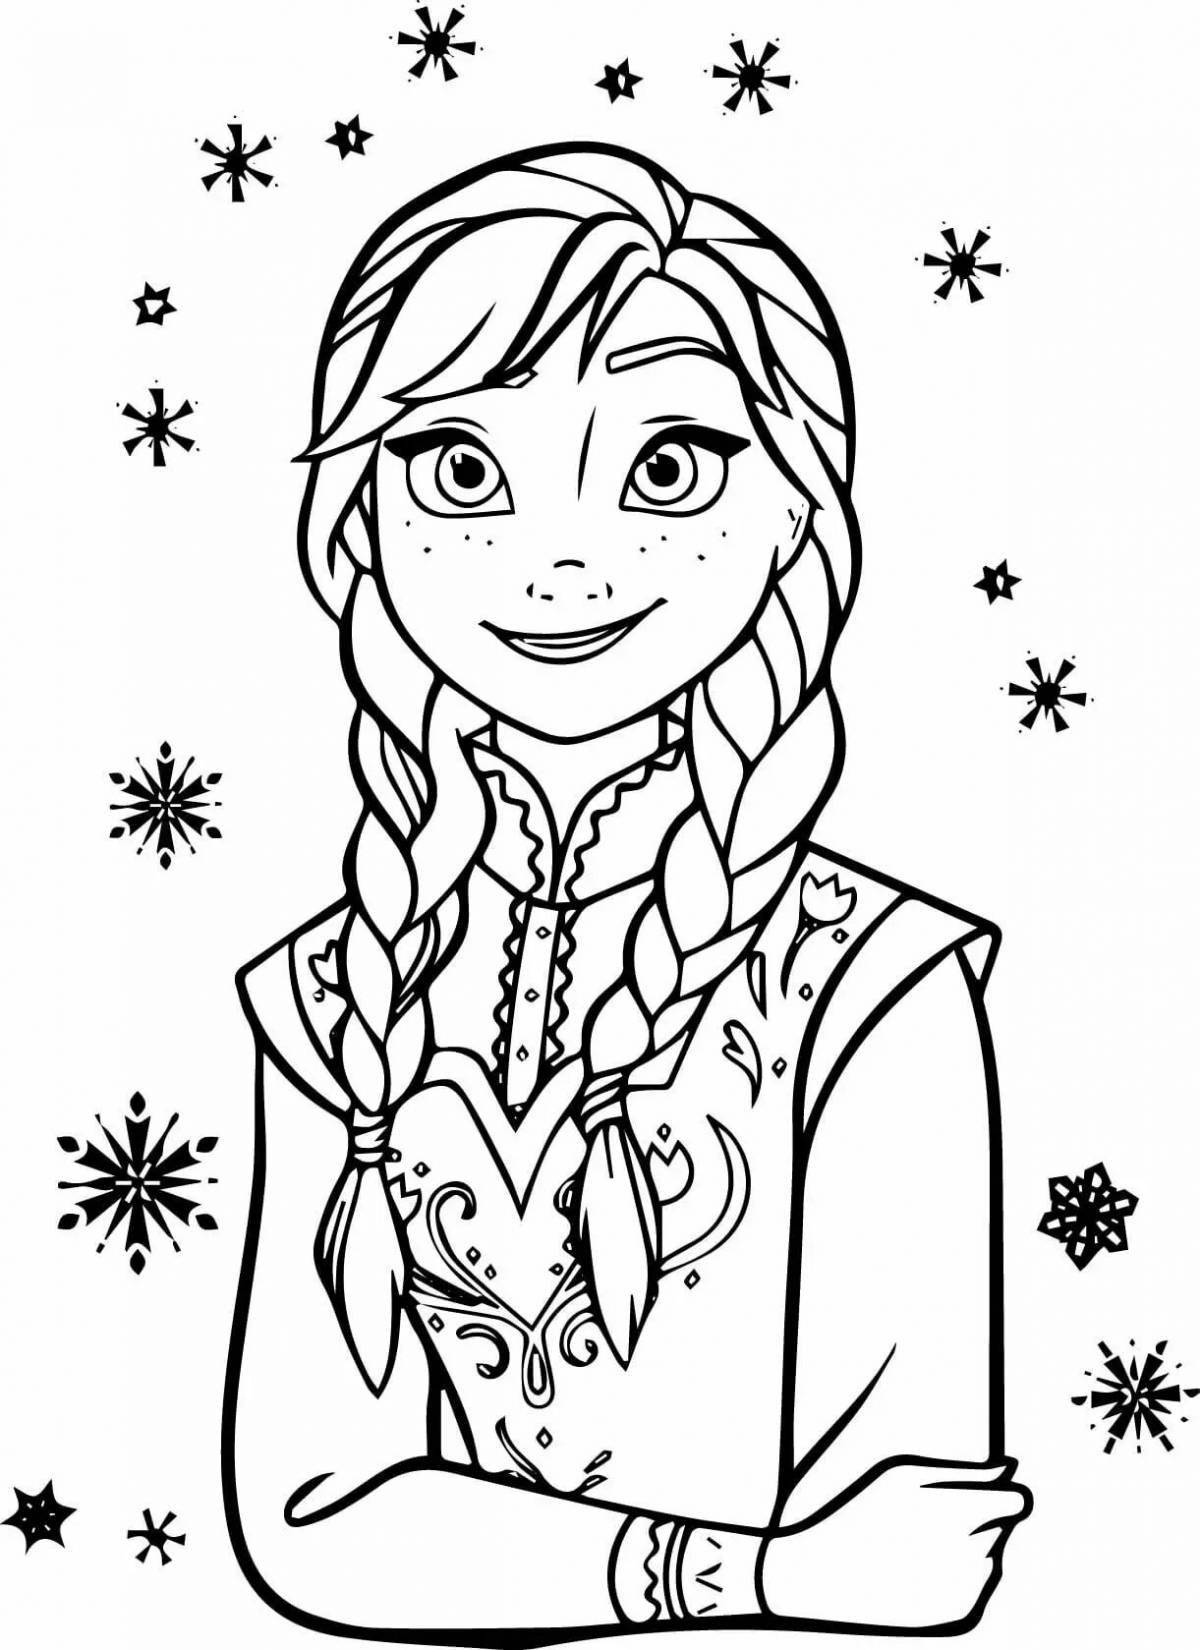 Cute Frozen coloring book for 6-7 year olds